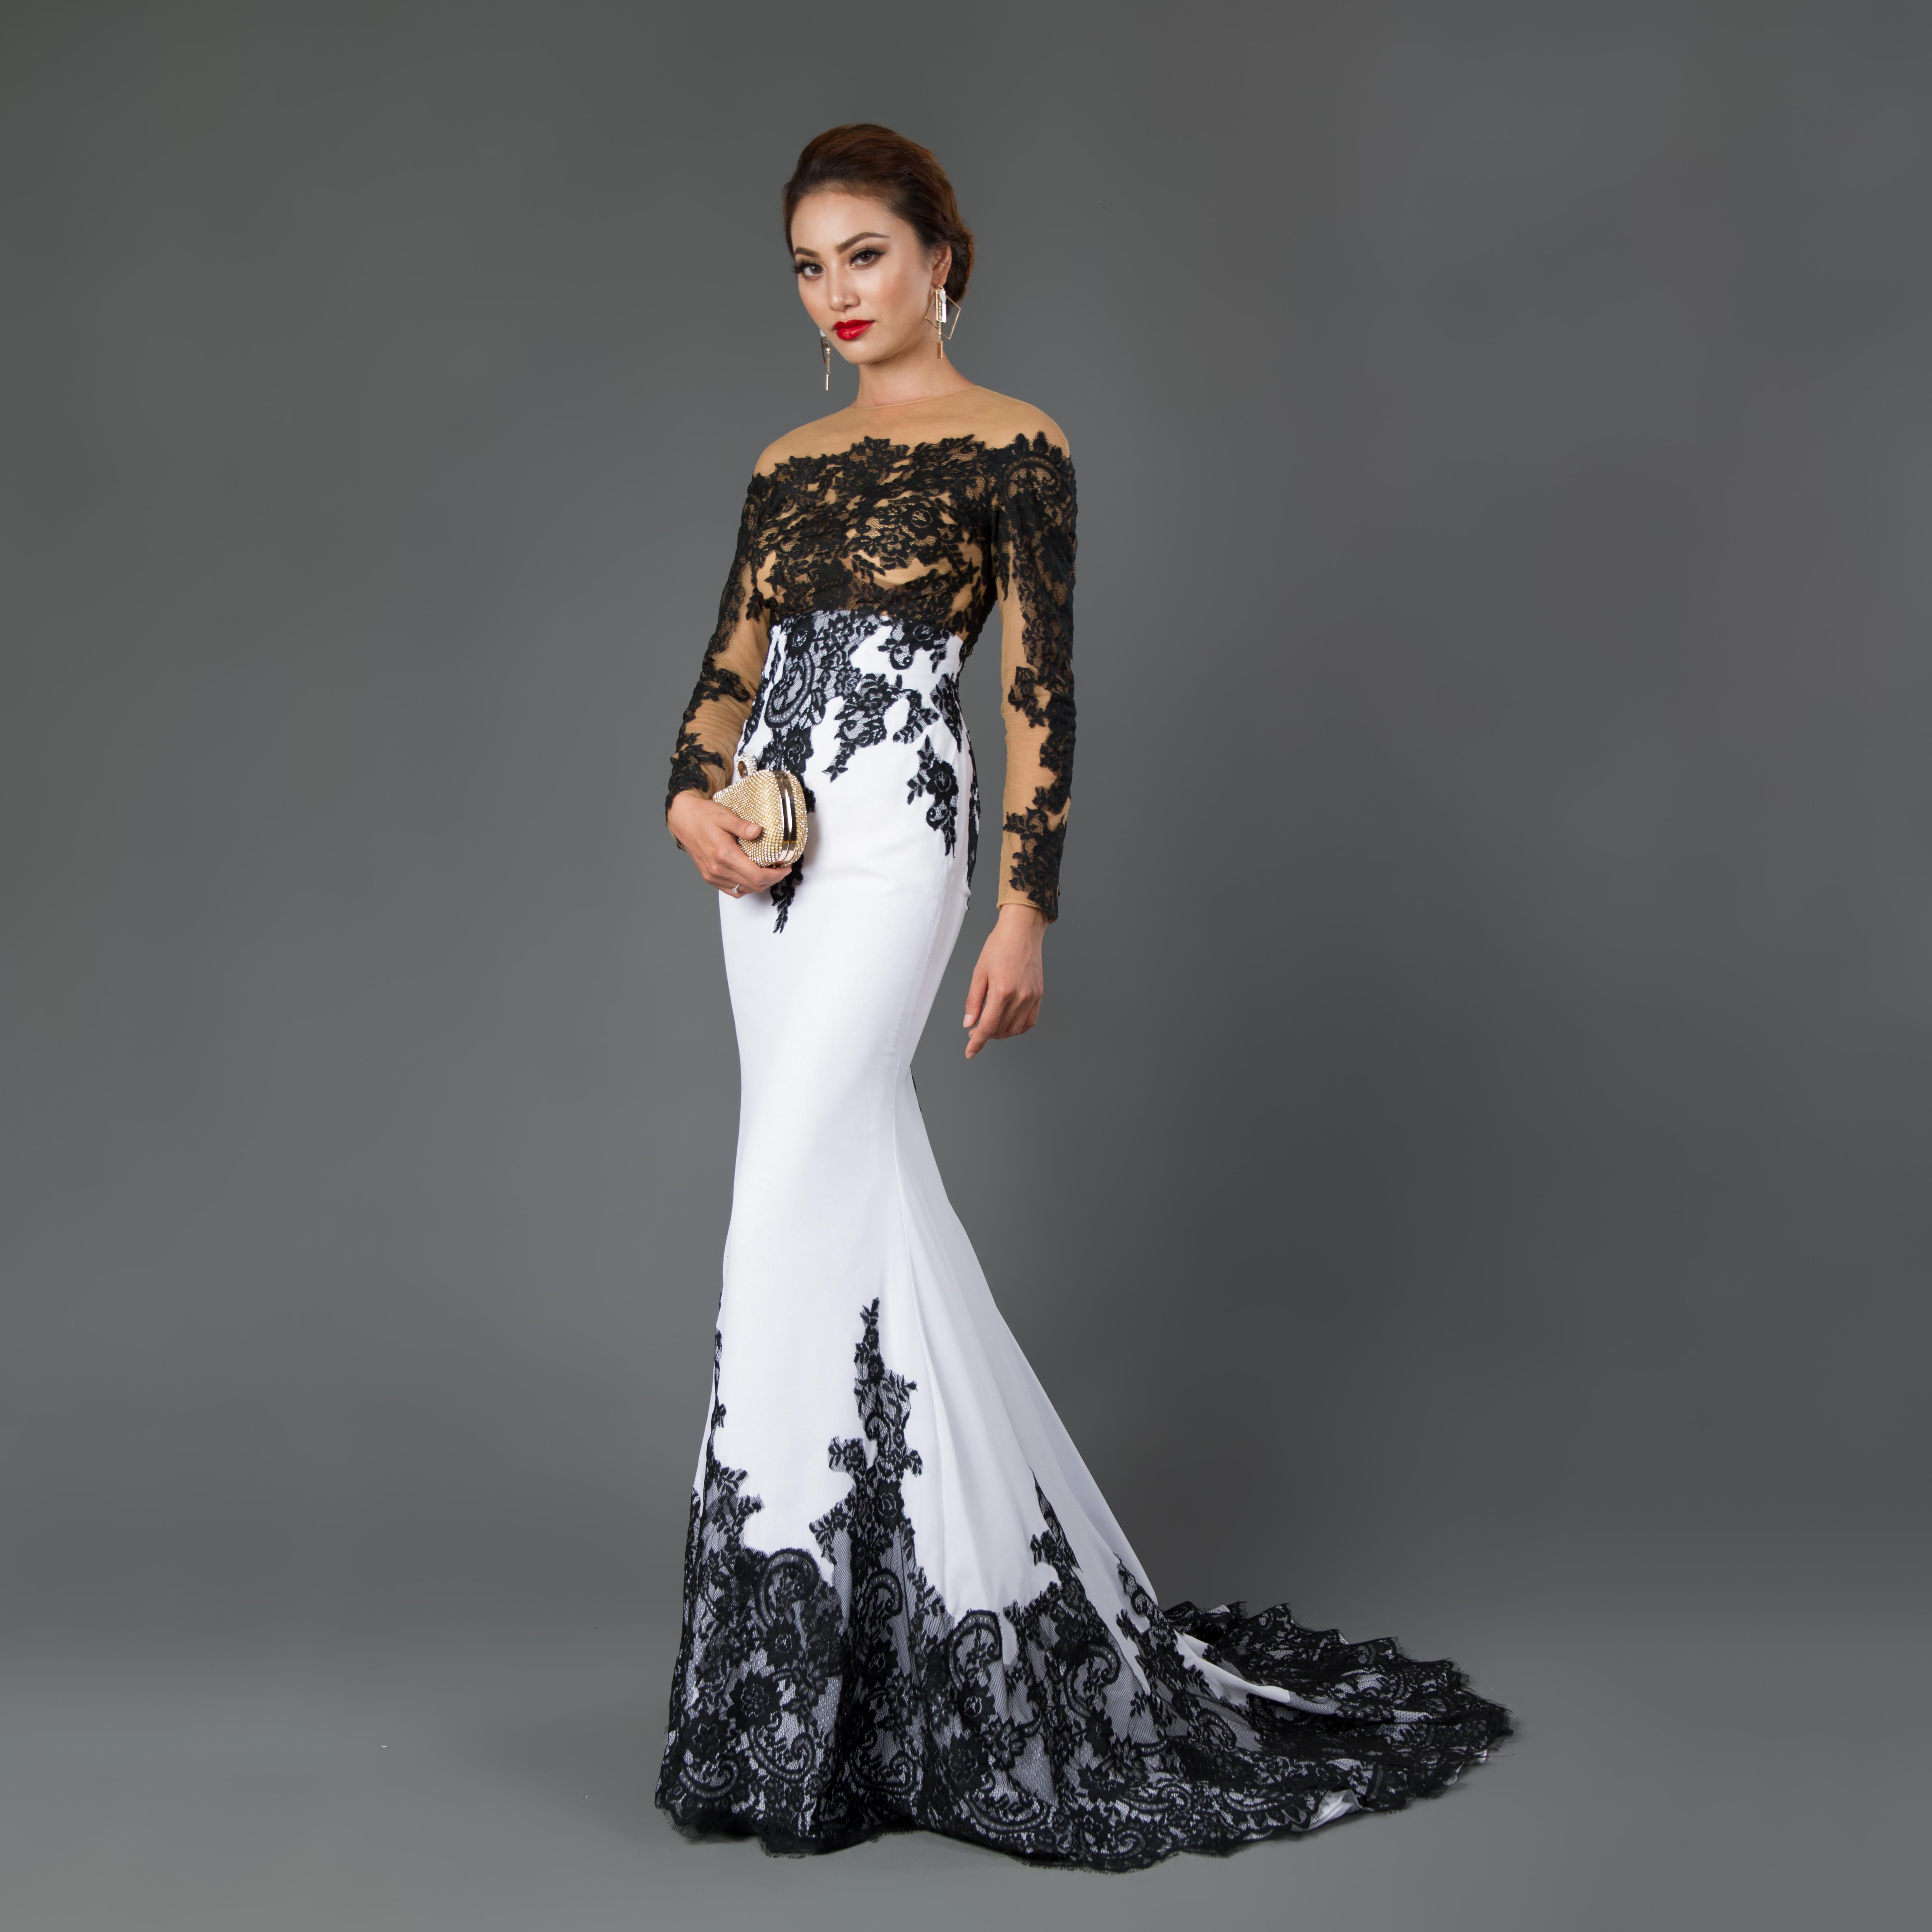 Image of Sale Long Sleeve Mermaid Evening Dress Appliques black lace sweep train formal Gowns Cocktail party provide Dresses